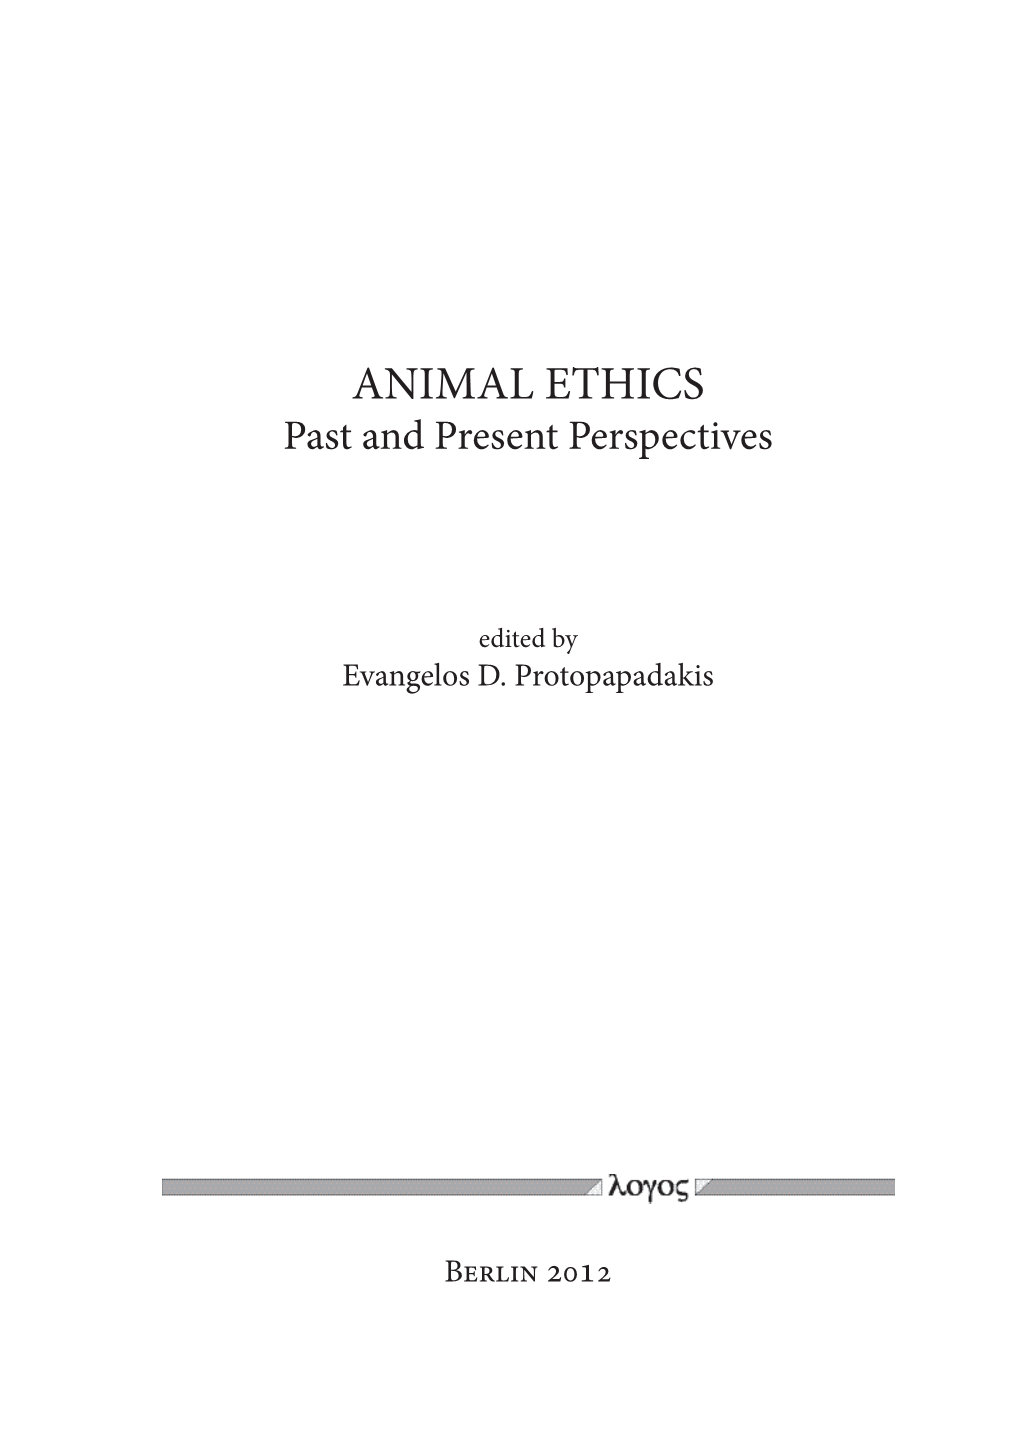 ANIMAL ETHICS Past and Present Perspectives